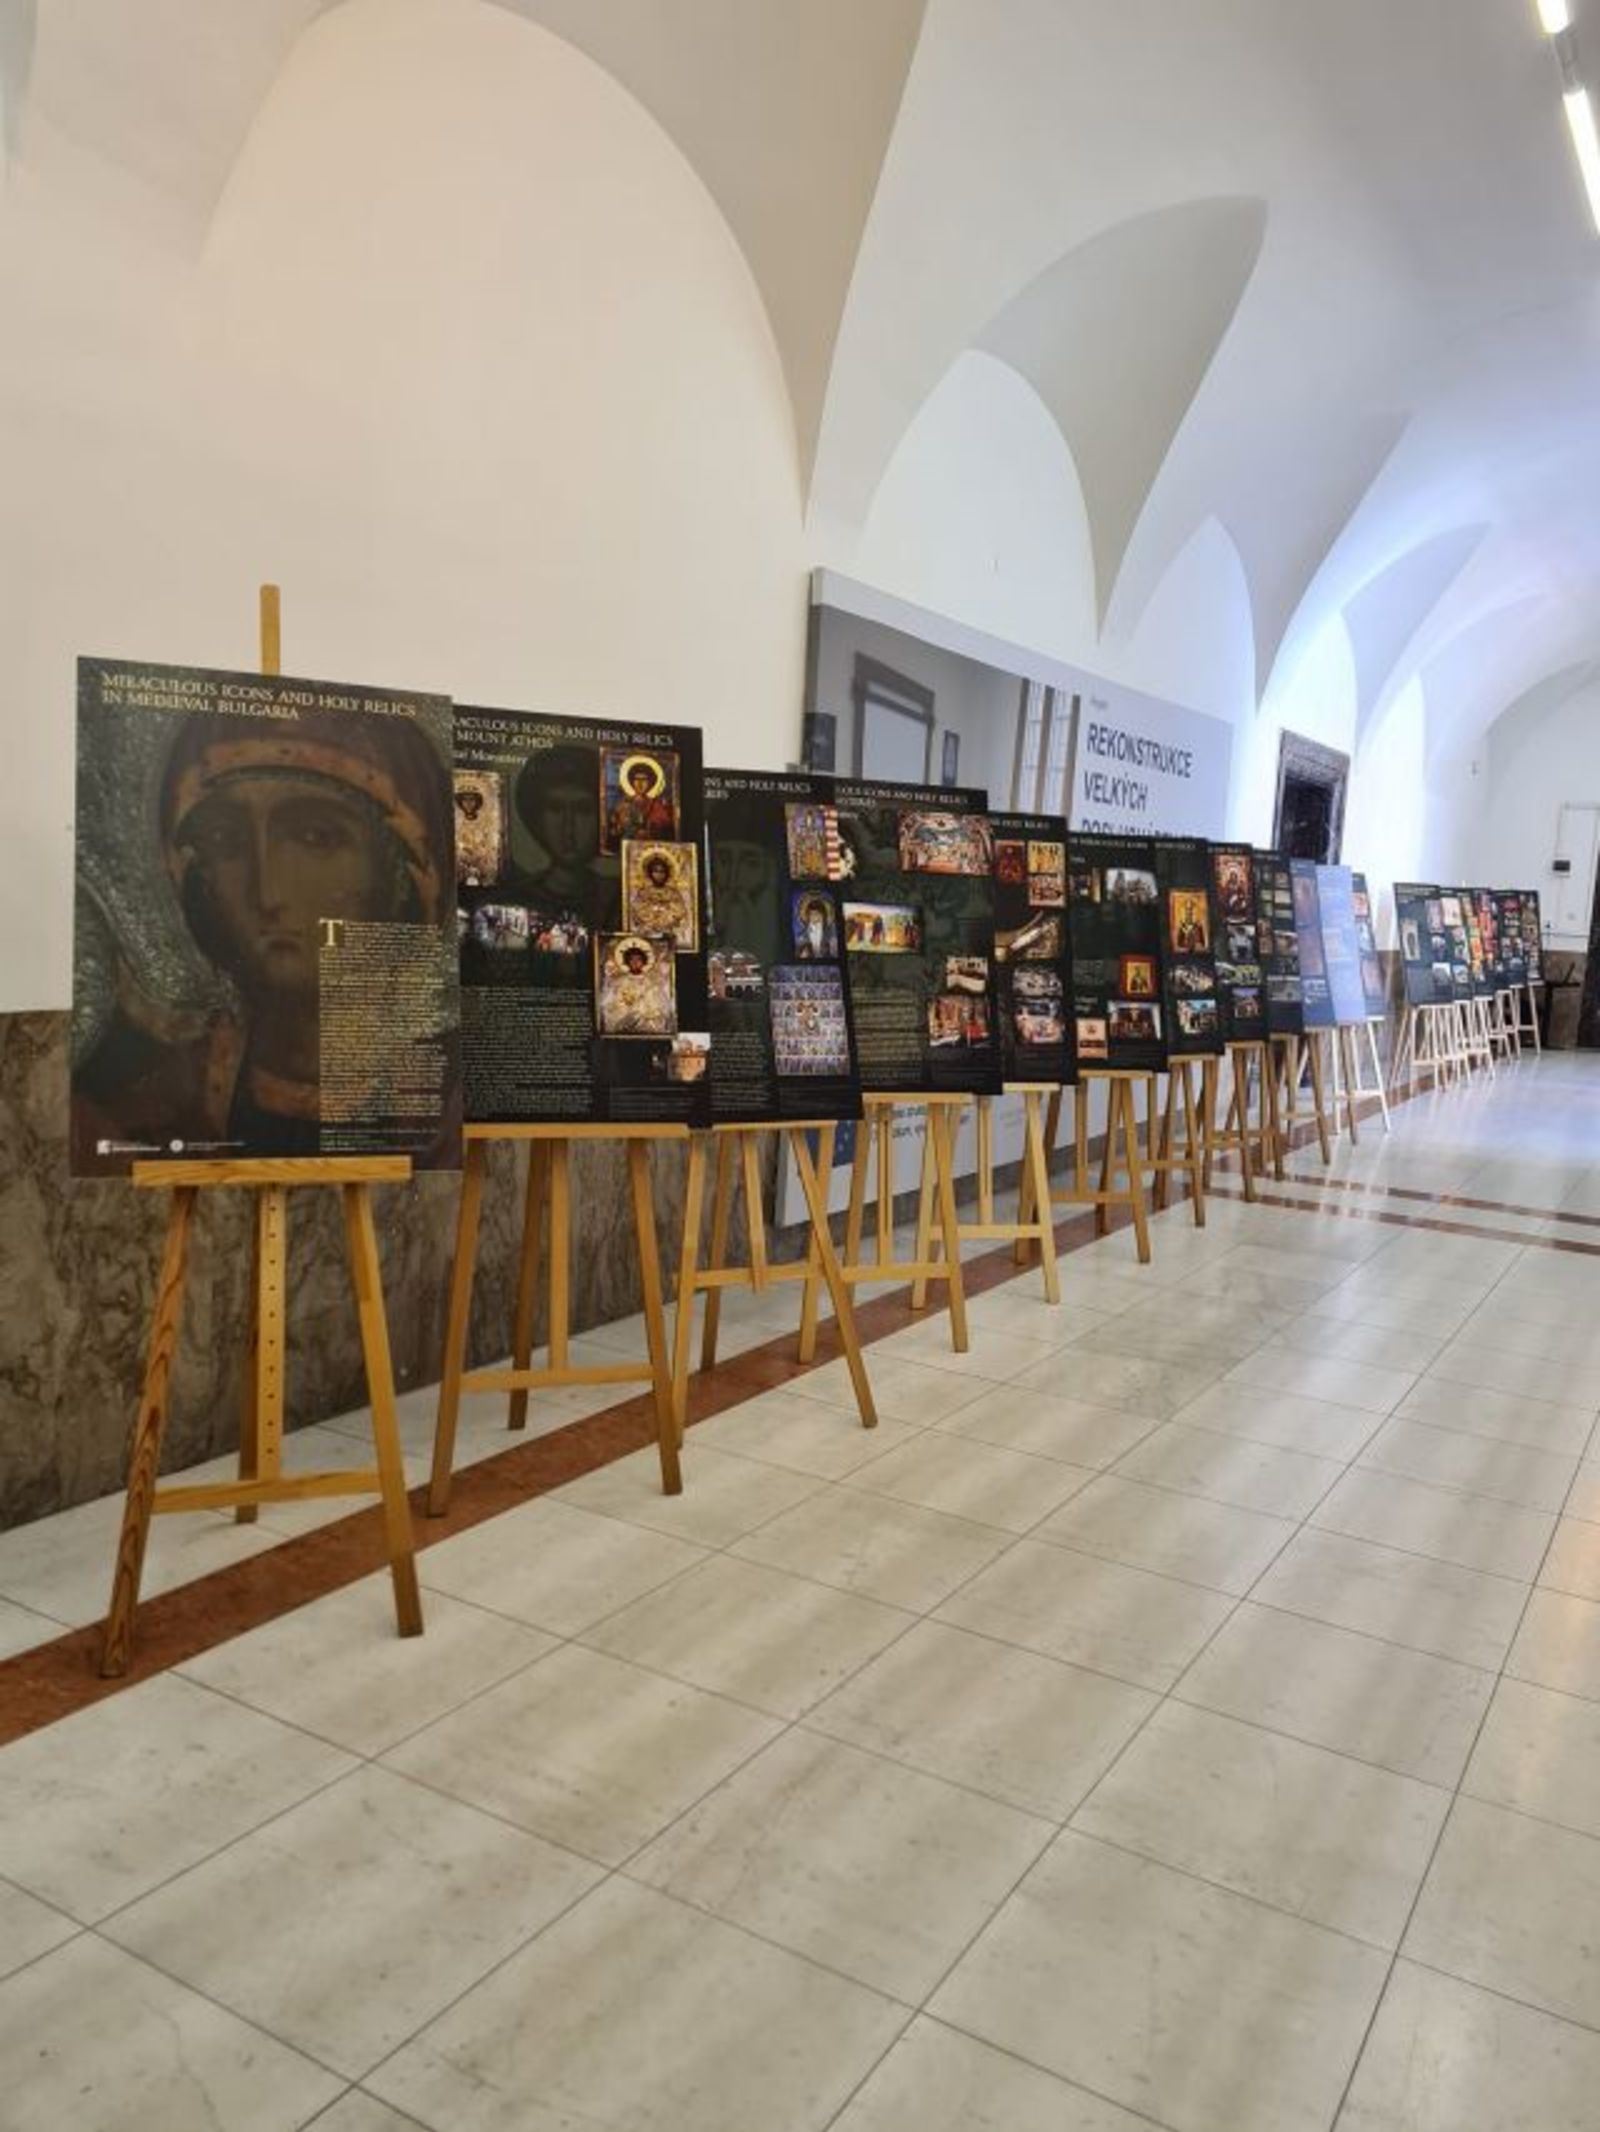 The Phototype Documentary Exhibition about Miraculous Icons of The Balkans Opened At Charles University In Prague